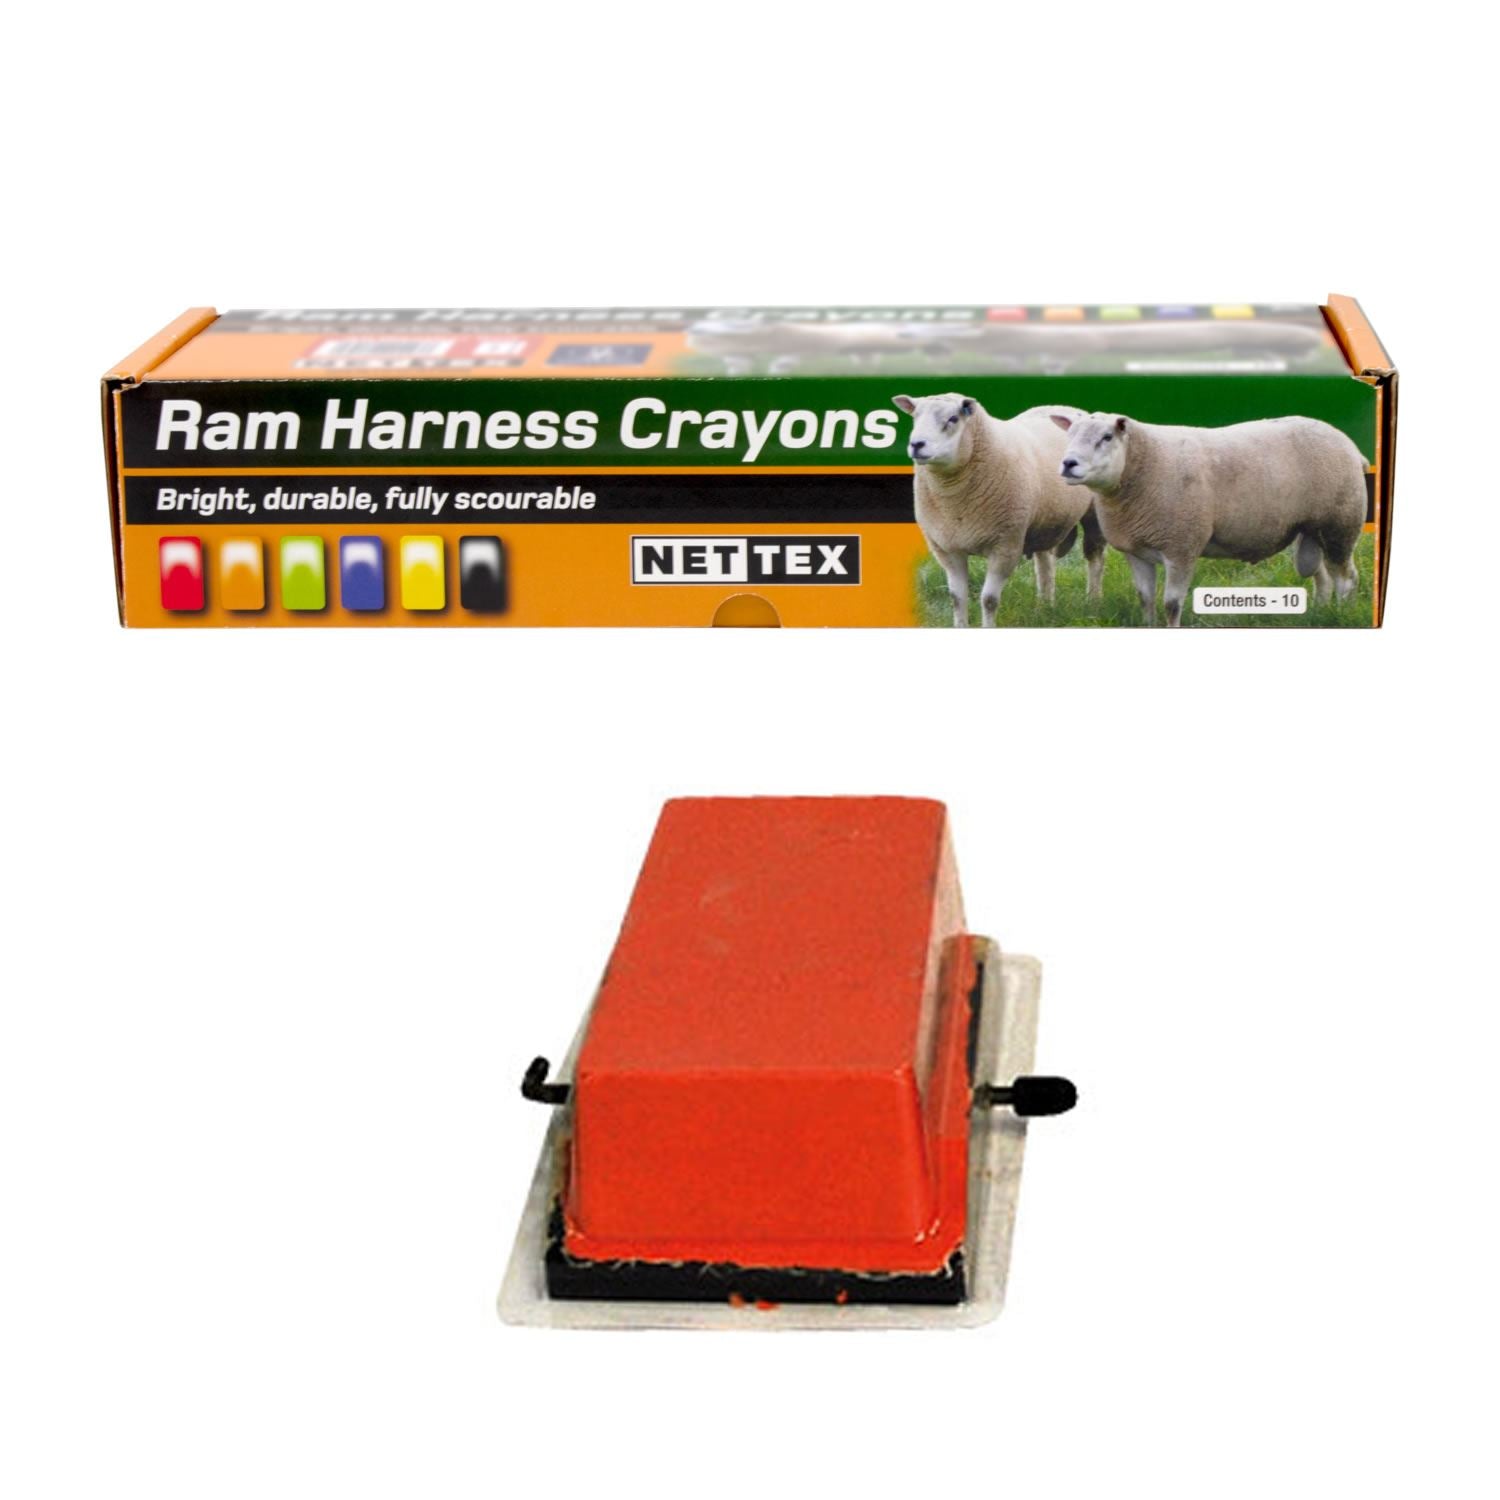 Nettex Cold Crayons - Just Horse Riders